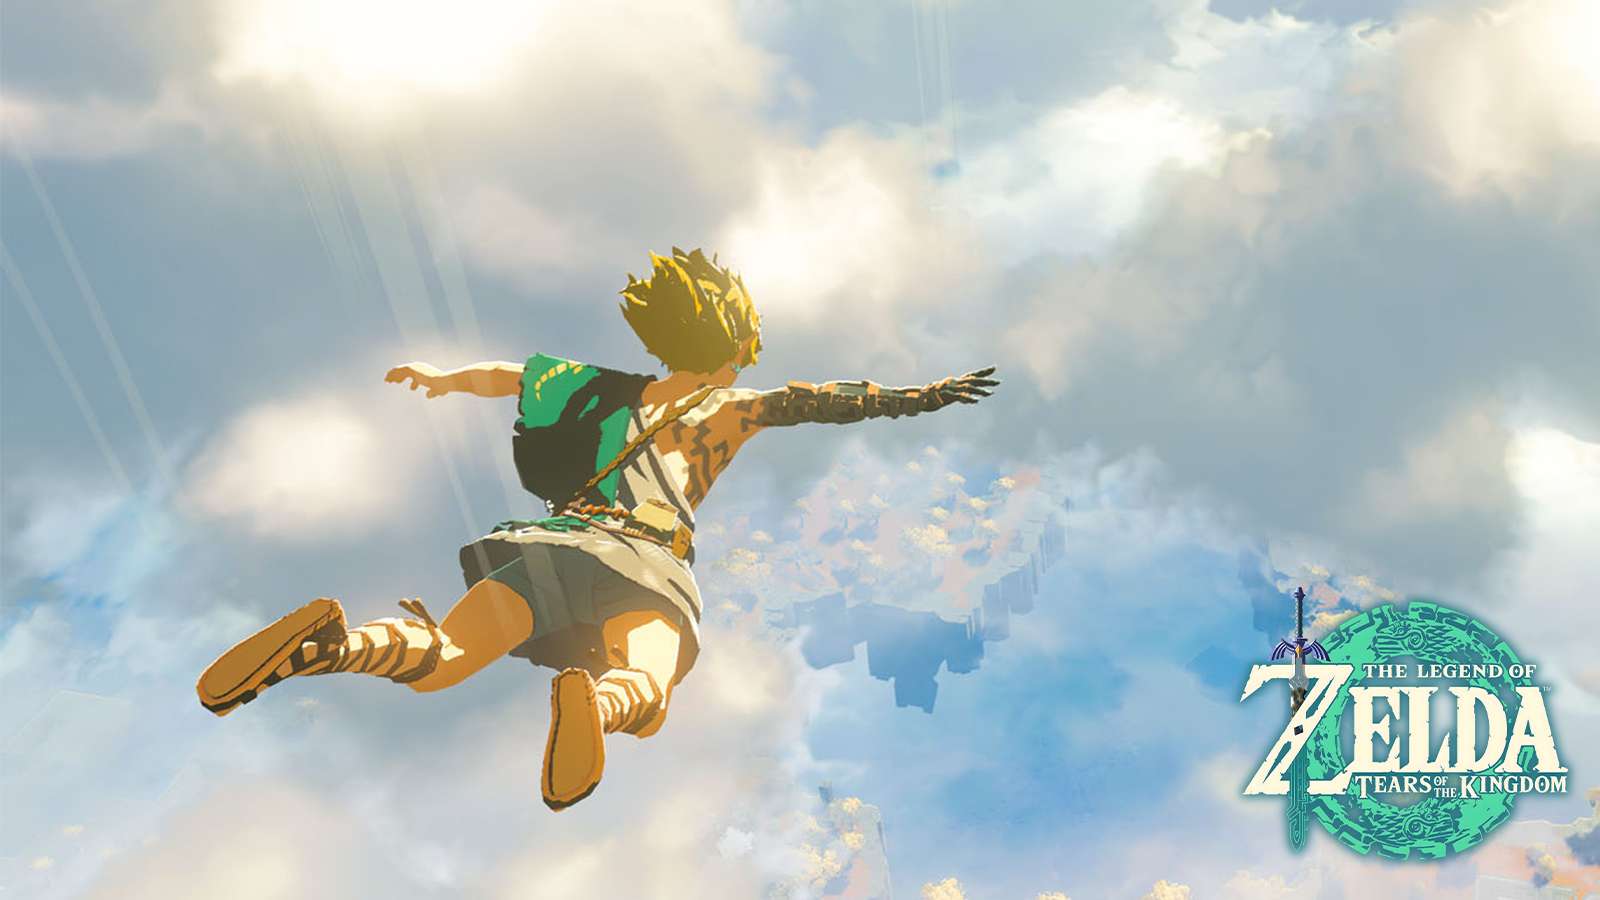 an image of a Zelda characters free falling